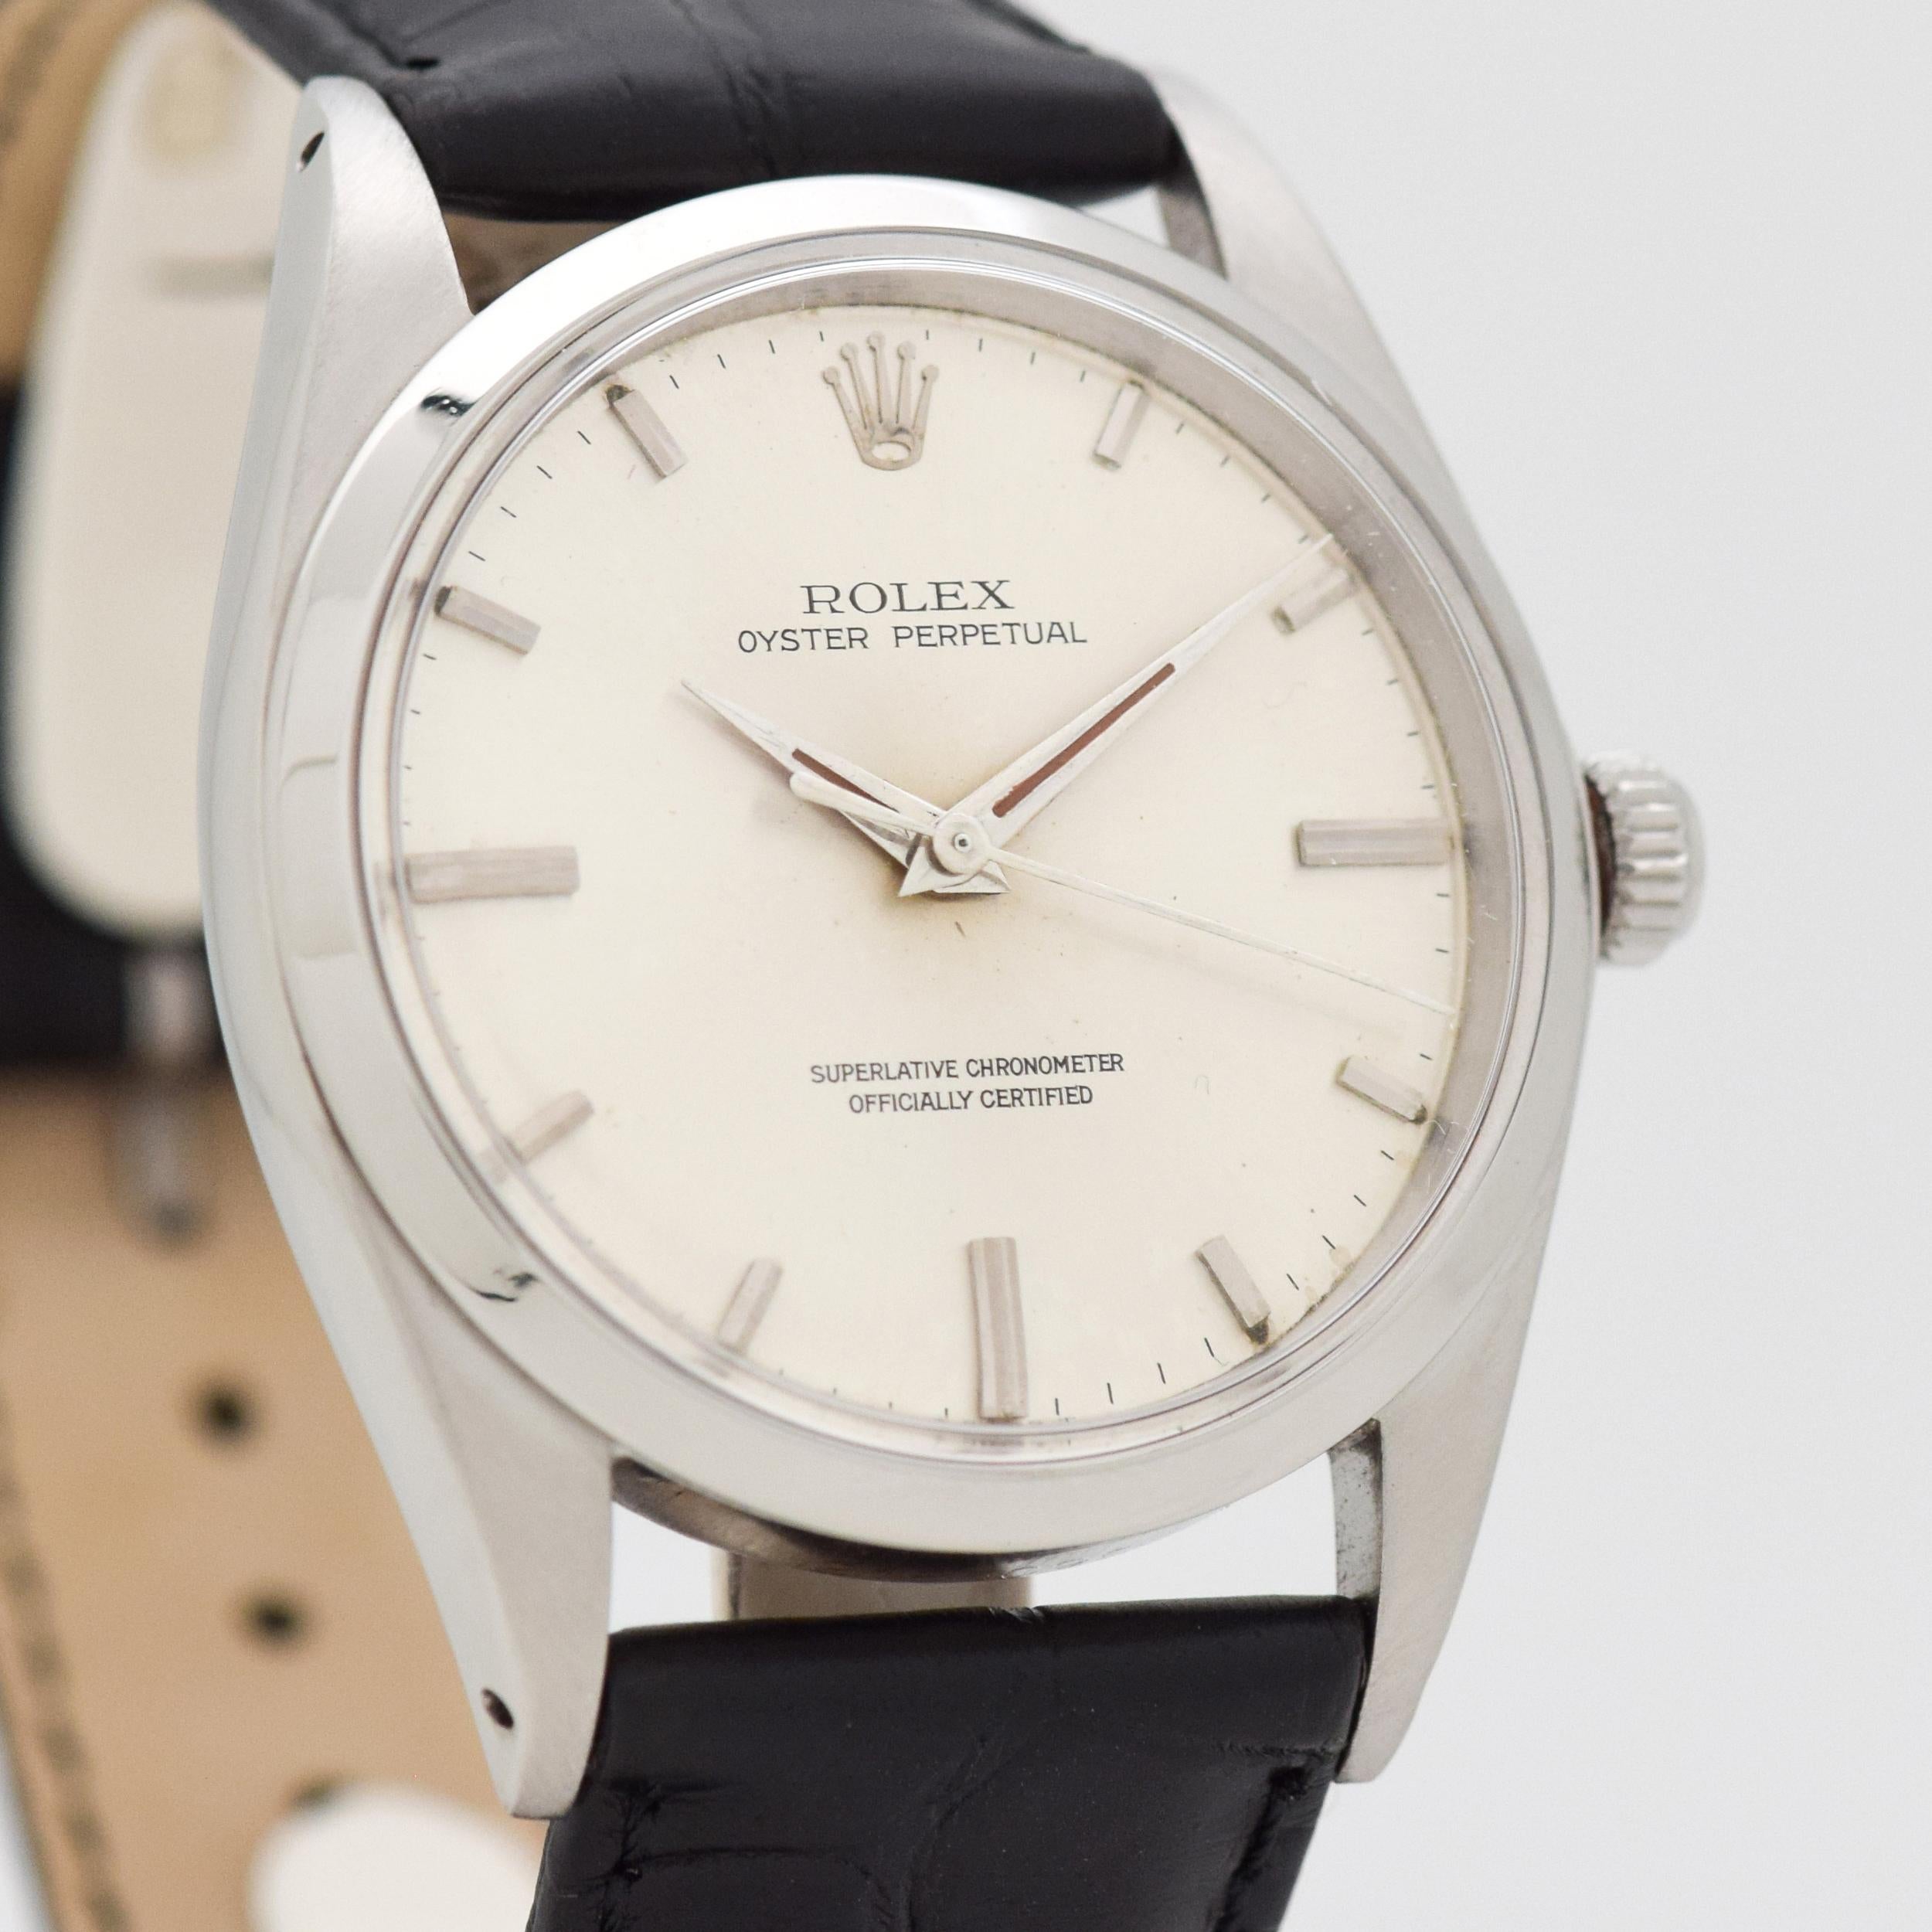 1968 Vintage Rolex Oyster Perpetual Relatively Rare Ref. 1018 36 mm Wide Stainless Steel watch with Original Silver Dial with Applied Steel Stick/Bar/Baton Markers. 36mm x 43mm lug to lug (1.42 in. x 1.69 in.) - Powered by a 26-jewel, automatic